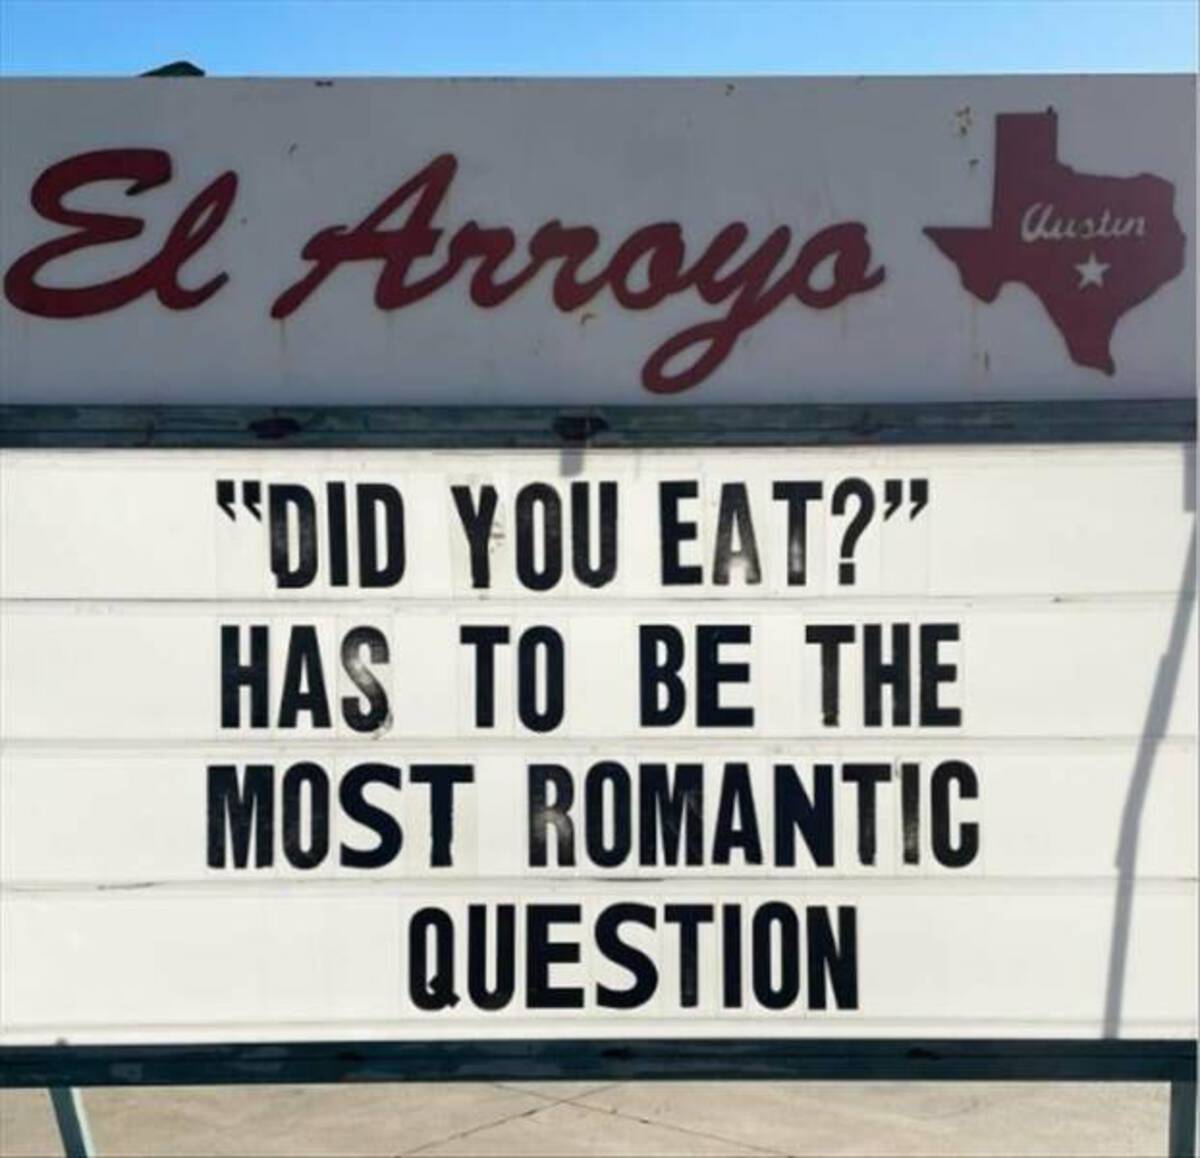 signage - El Arroyo Austin "Did You Eat?" Has To Be The Most Romantic Question